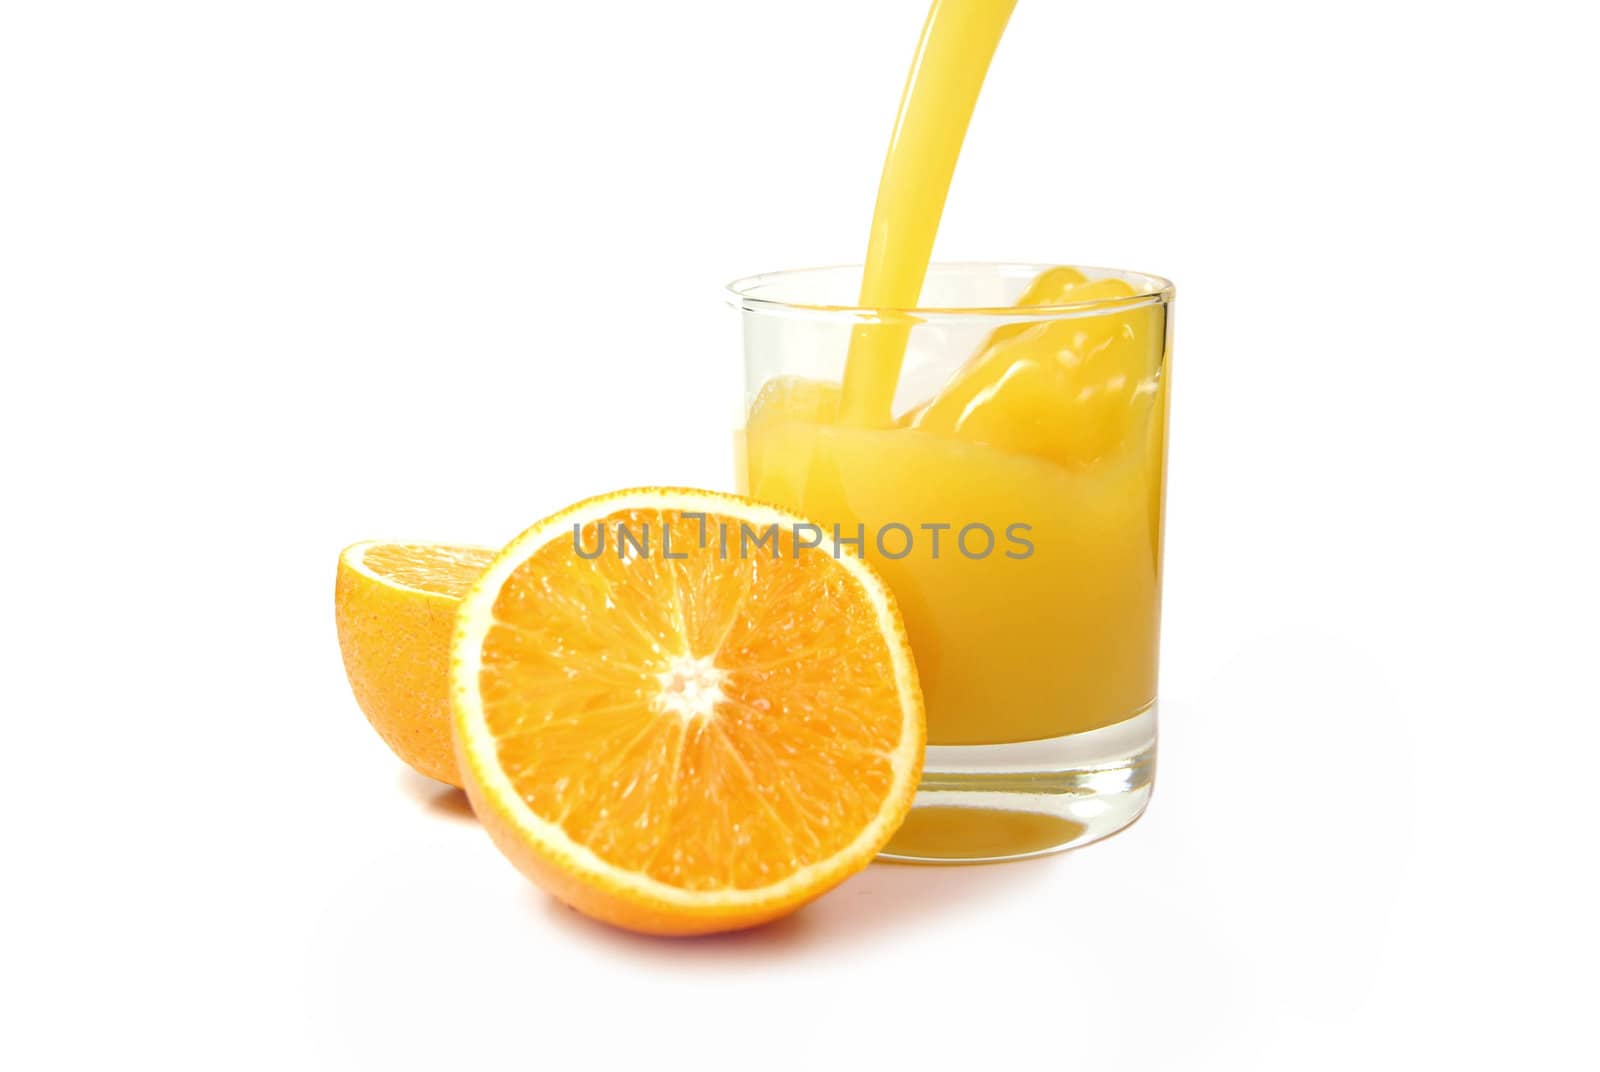 Pouring a fresh glass of orange juice